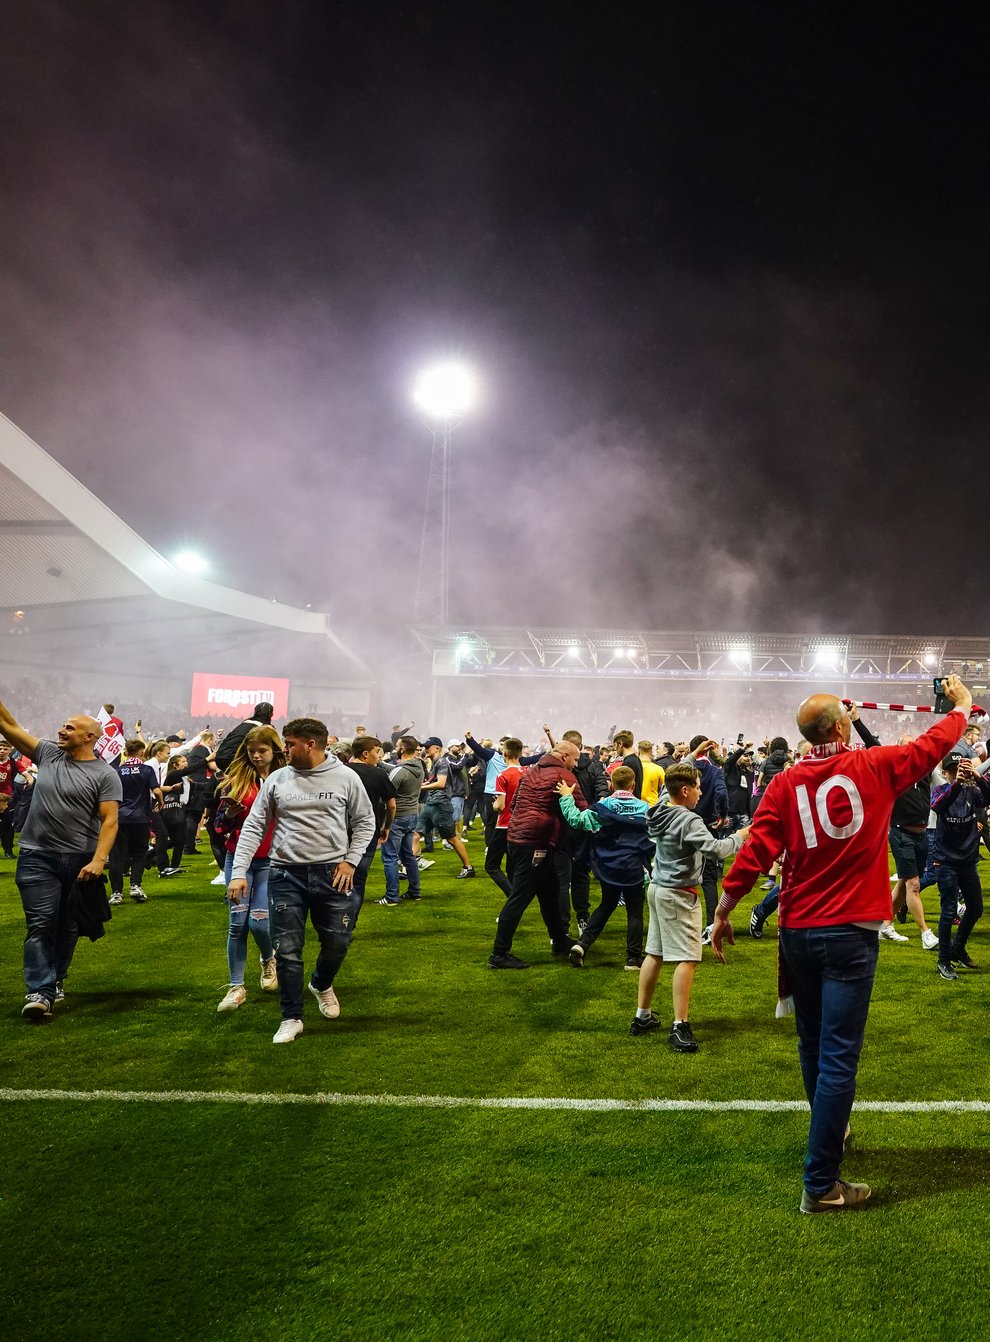 Nottingham Forest fans celebrate on the pitch after they reach the play off final during the Sky Bet Championship play-off semi-final, second leg match at the City Ground, Nottingham (Zac Goodwin/PA)